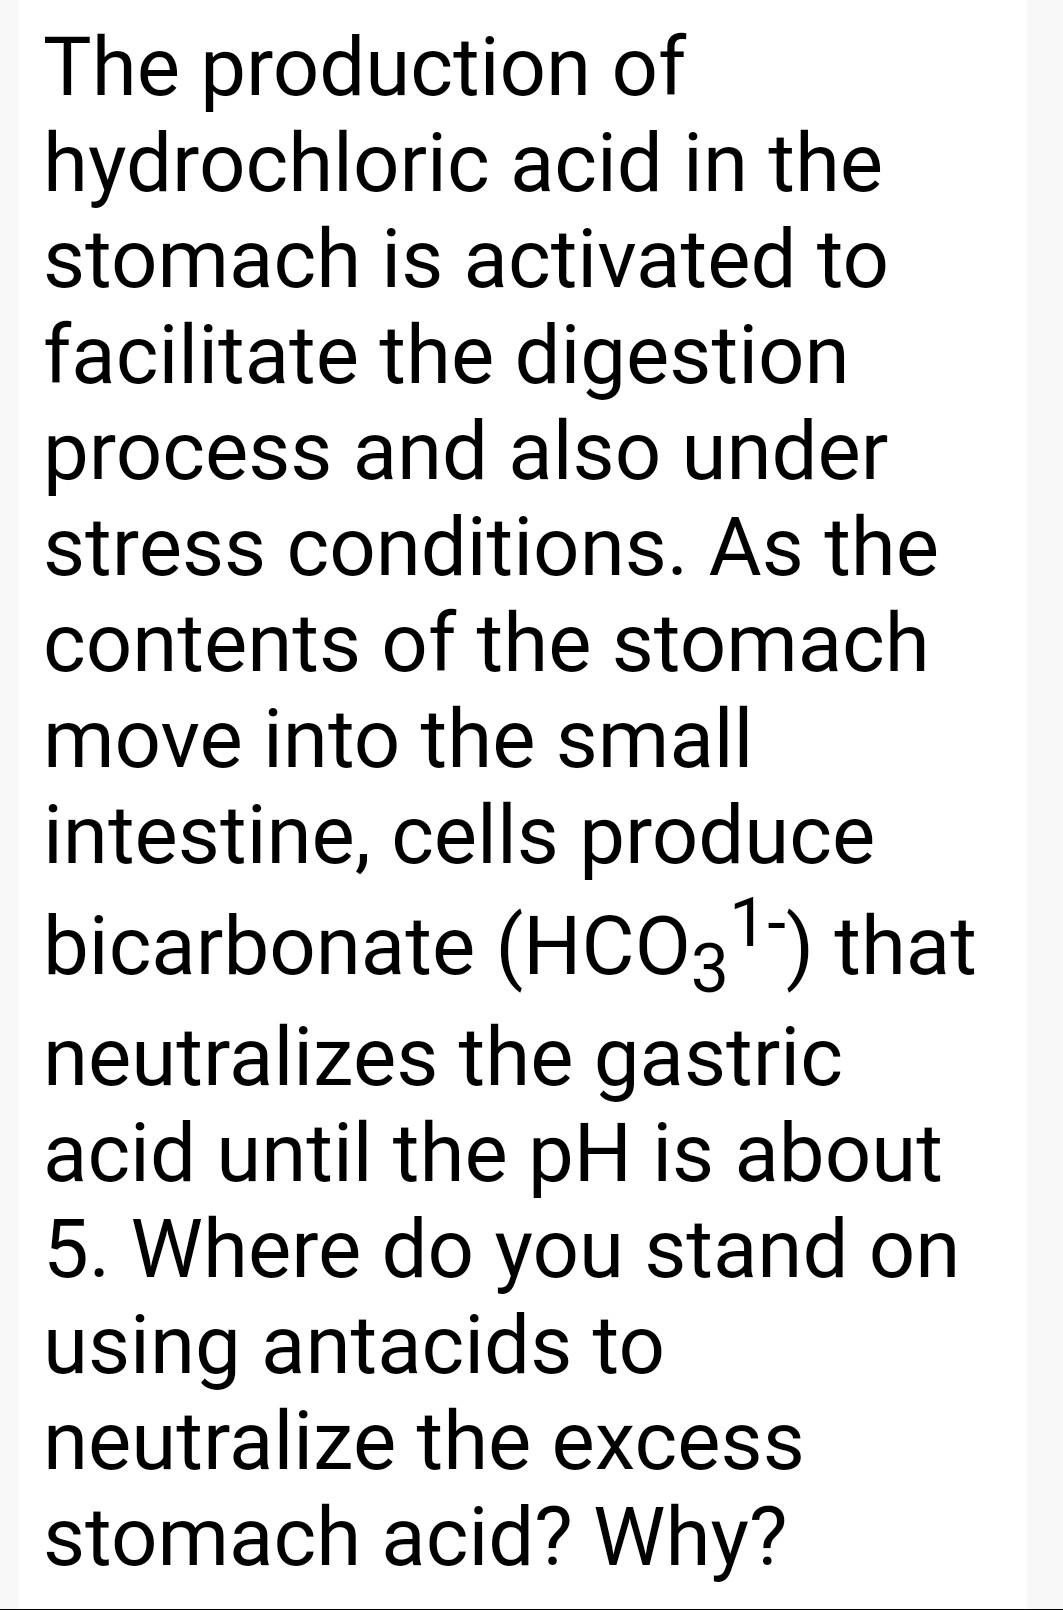 hydrochloric acid in the stomach